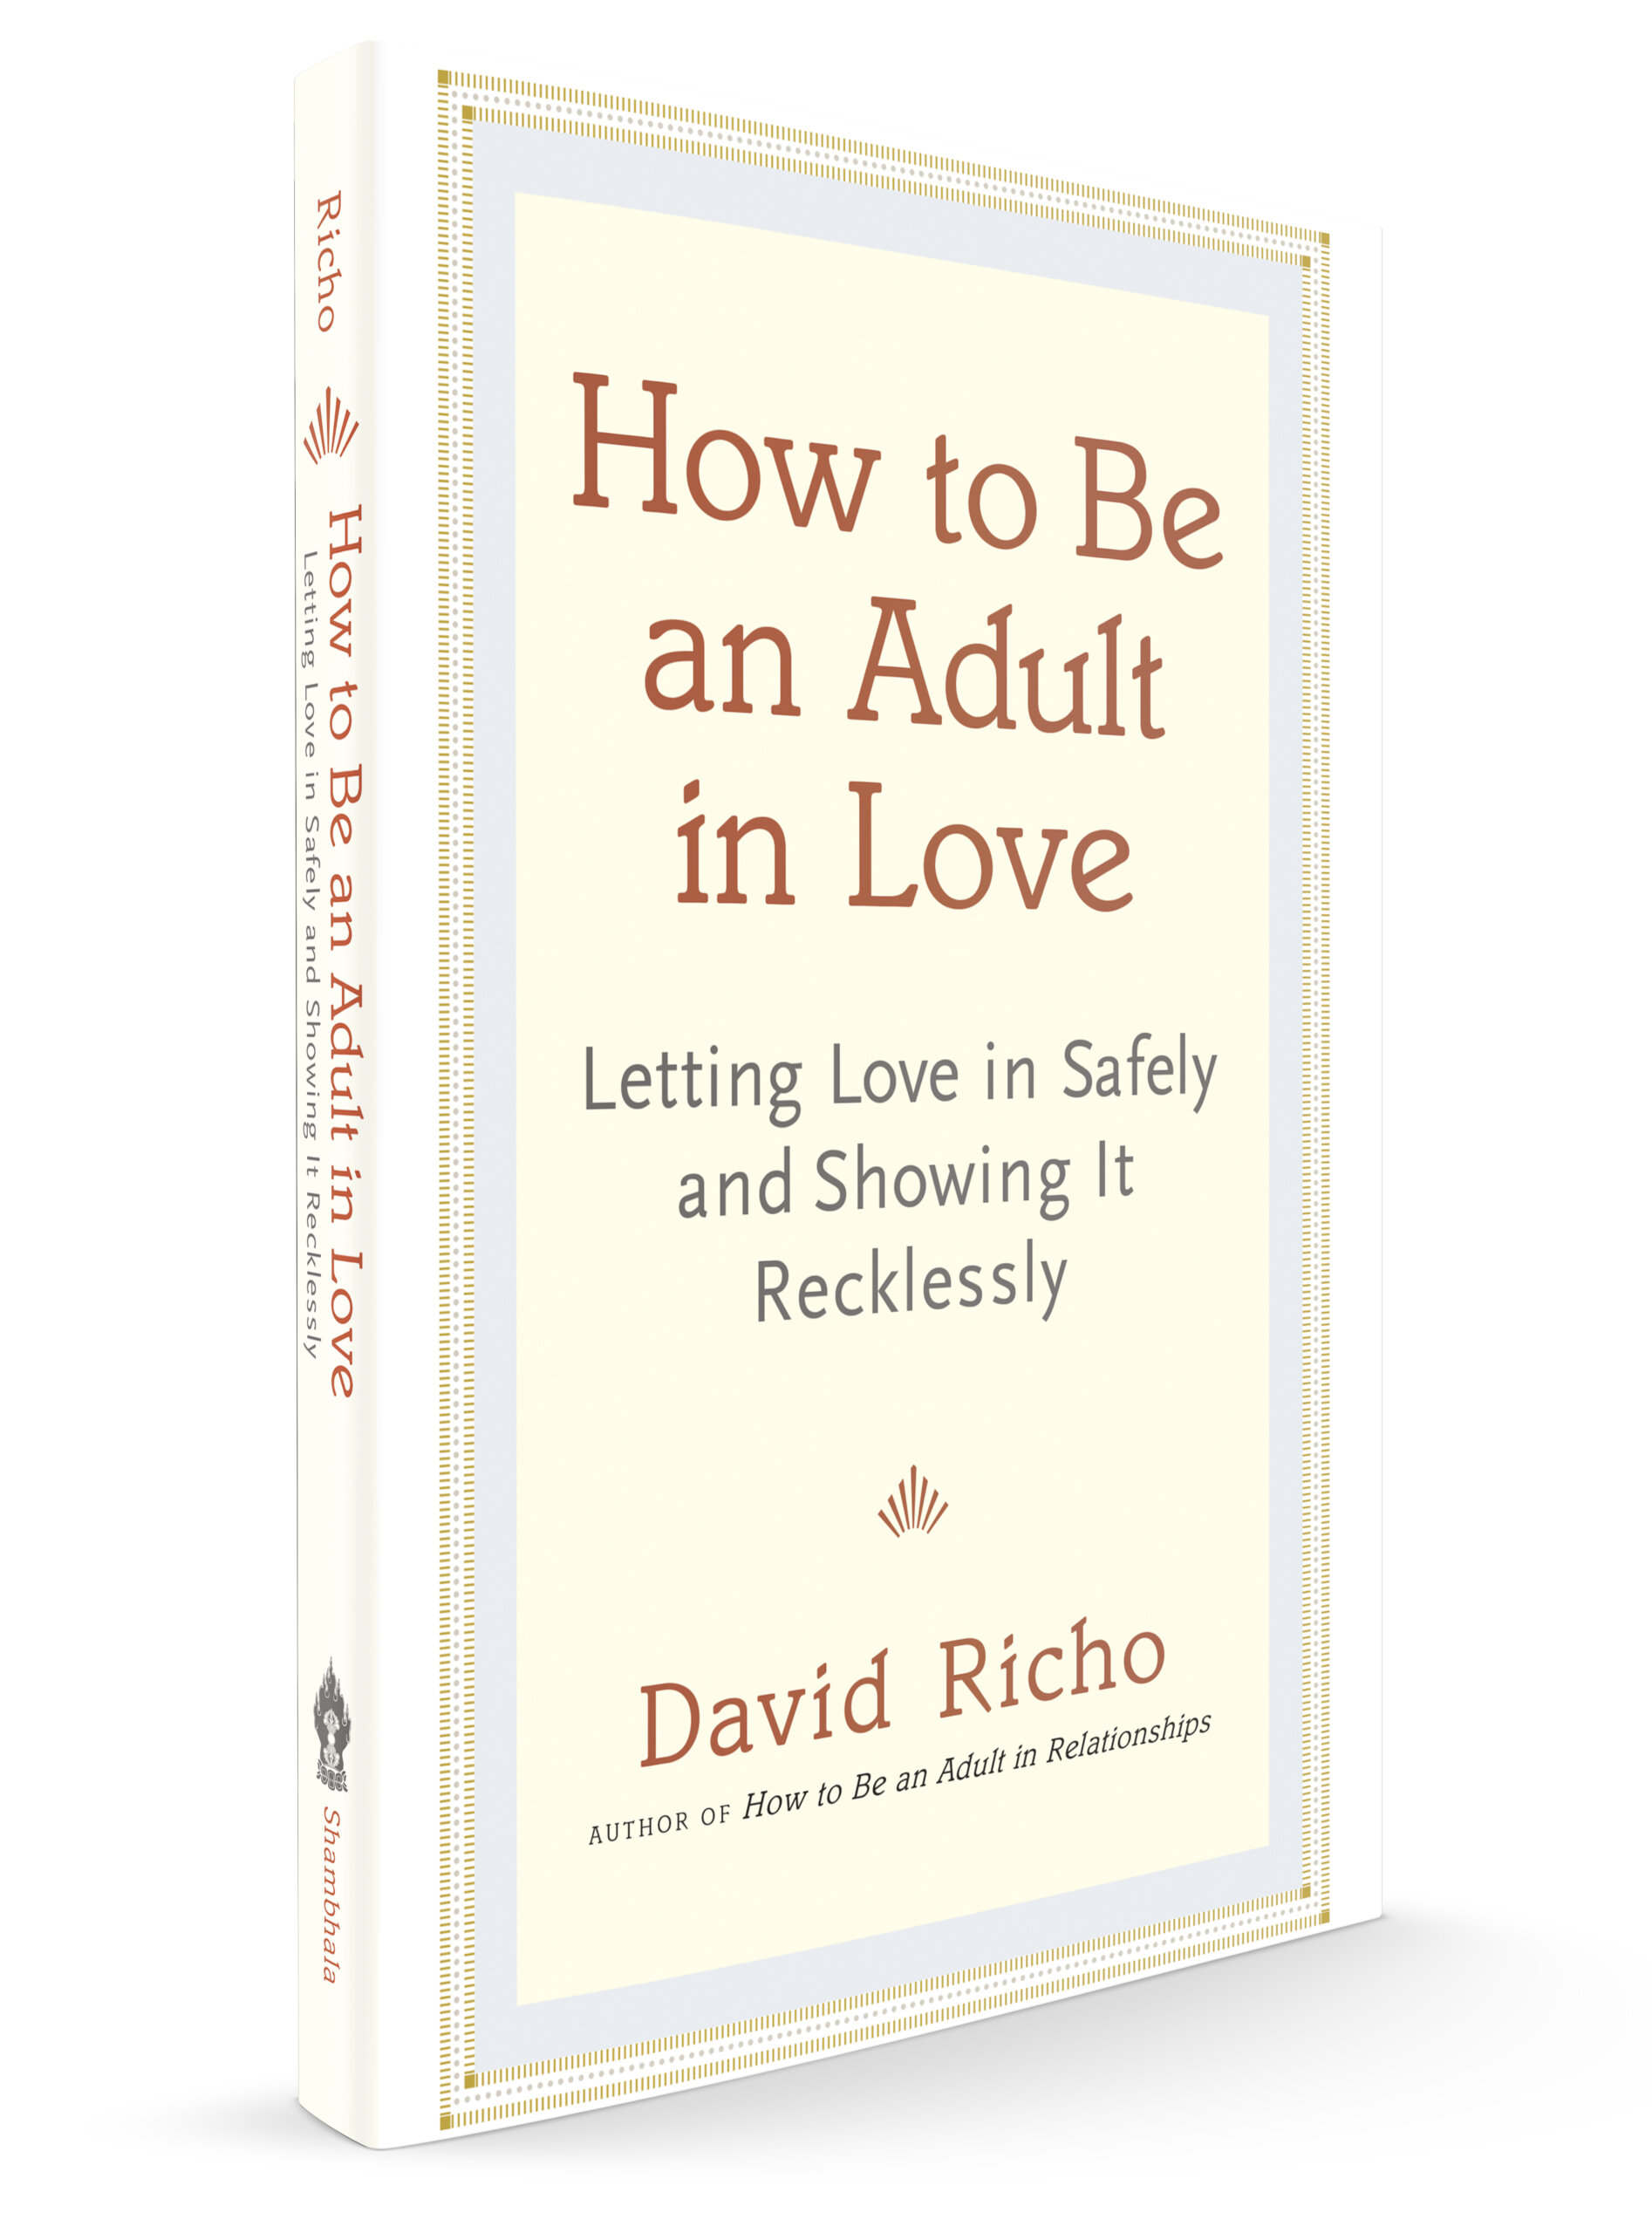 How to Be an Adult in Love